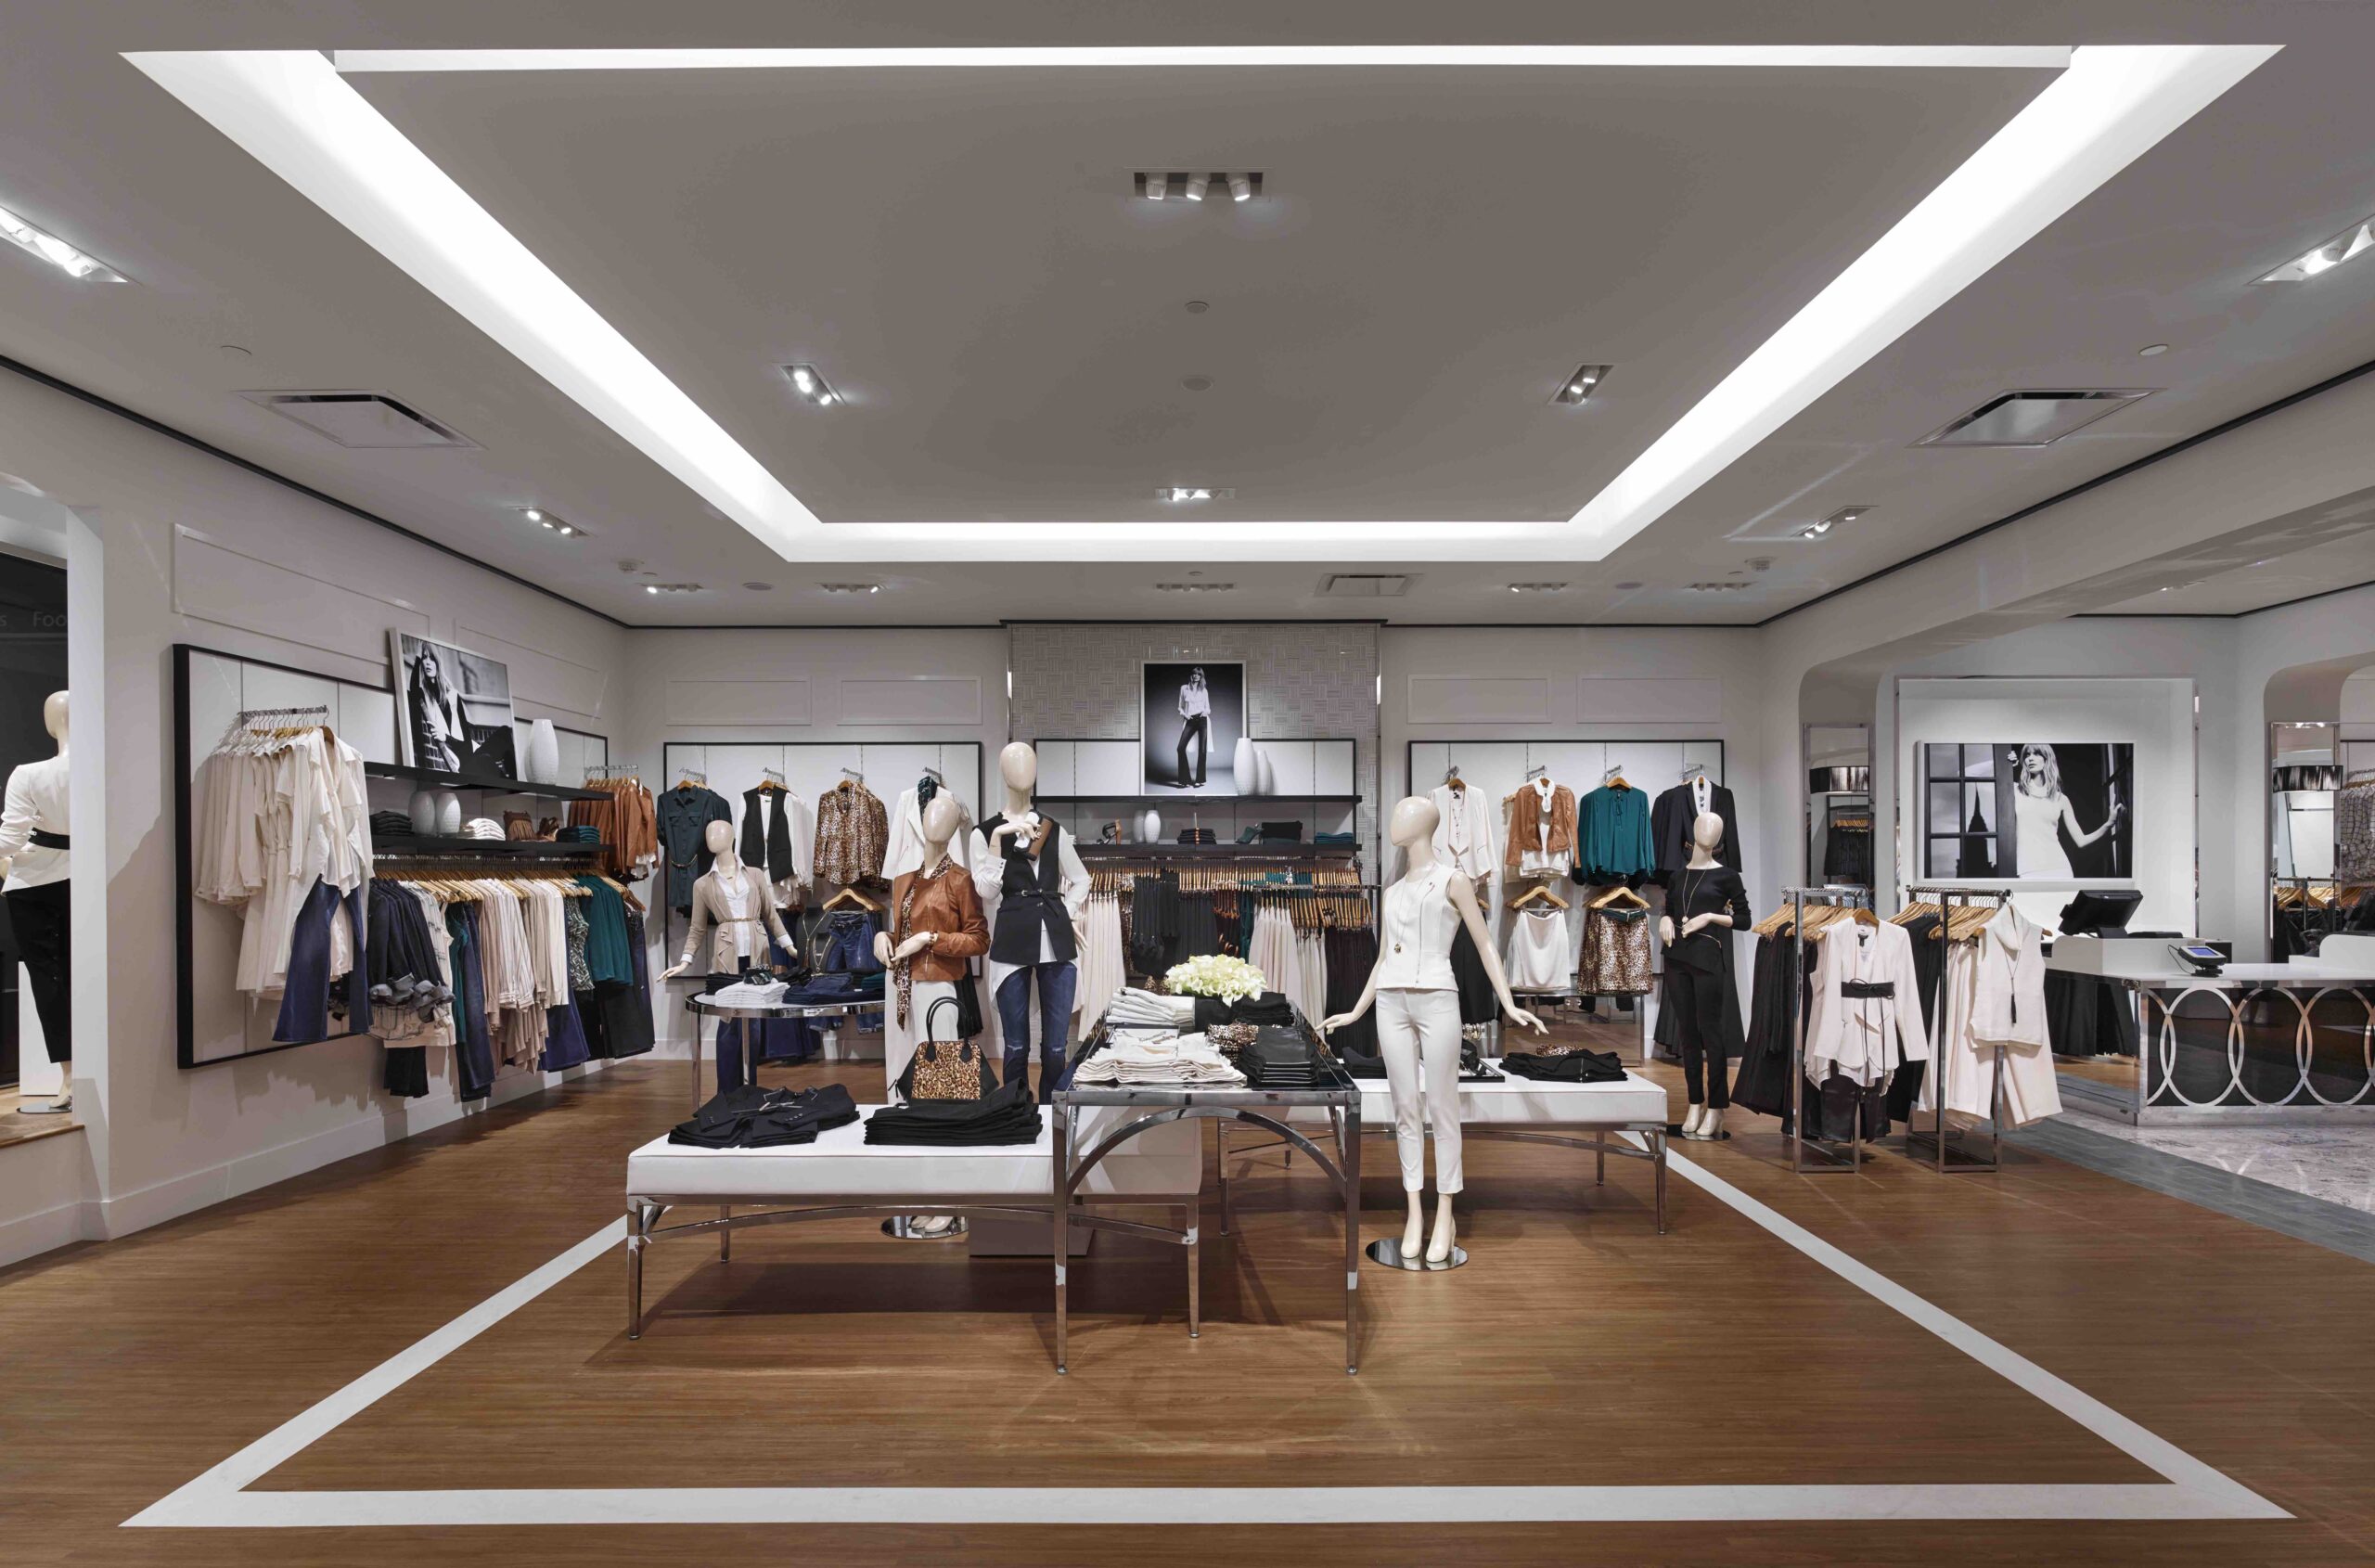 Retail Comeback: A Demand for the Brick-and-Mortar Store Experience